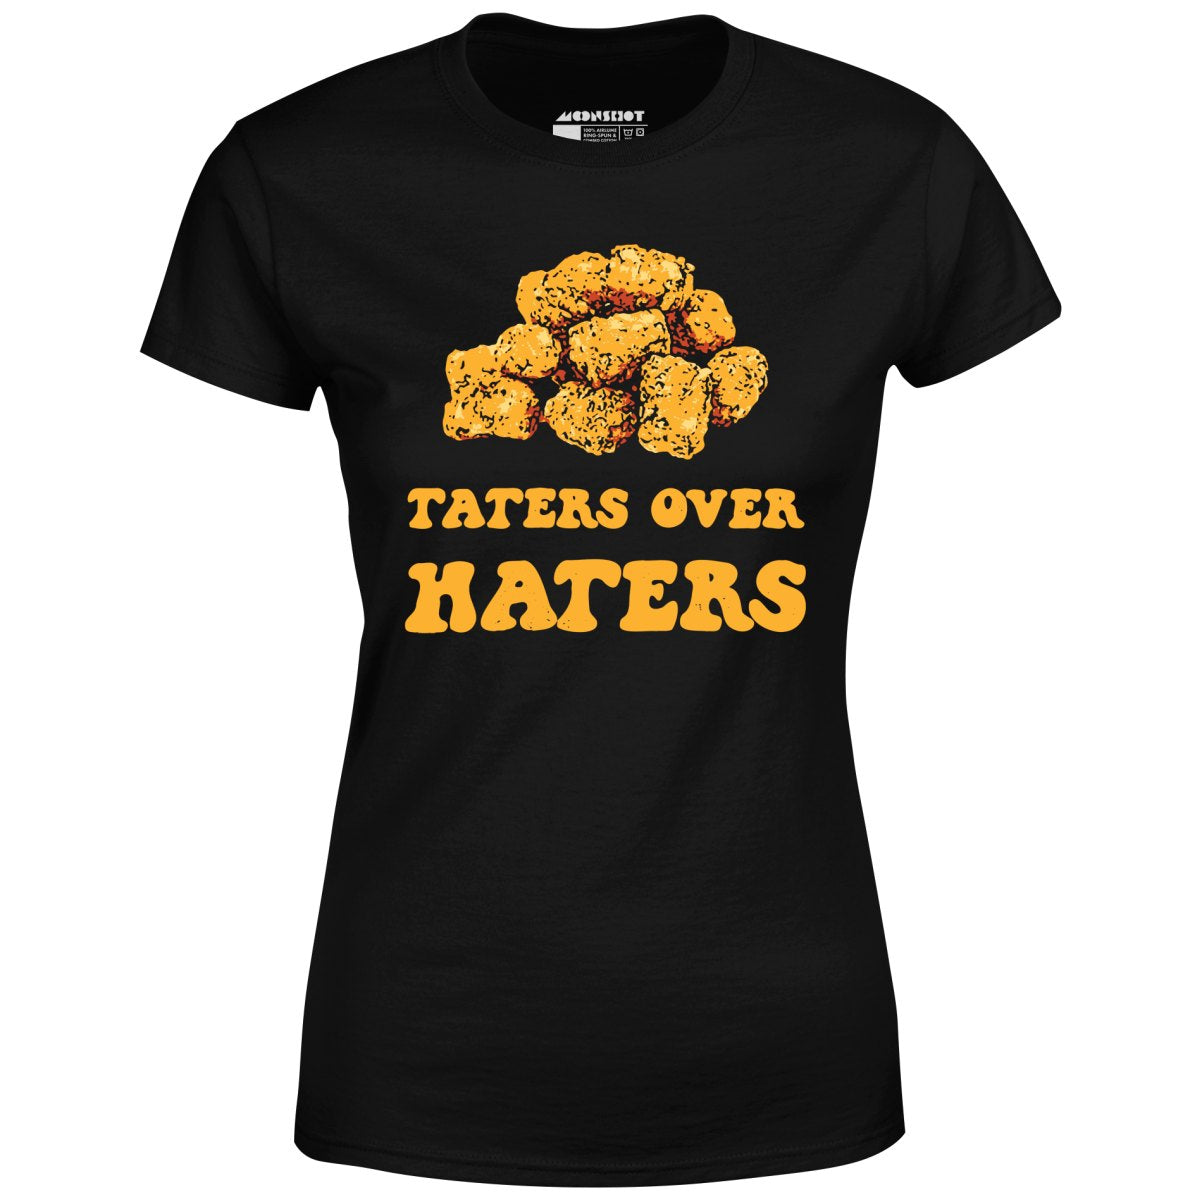 Taters Over Haters - Women's T-Shirt